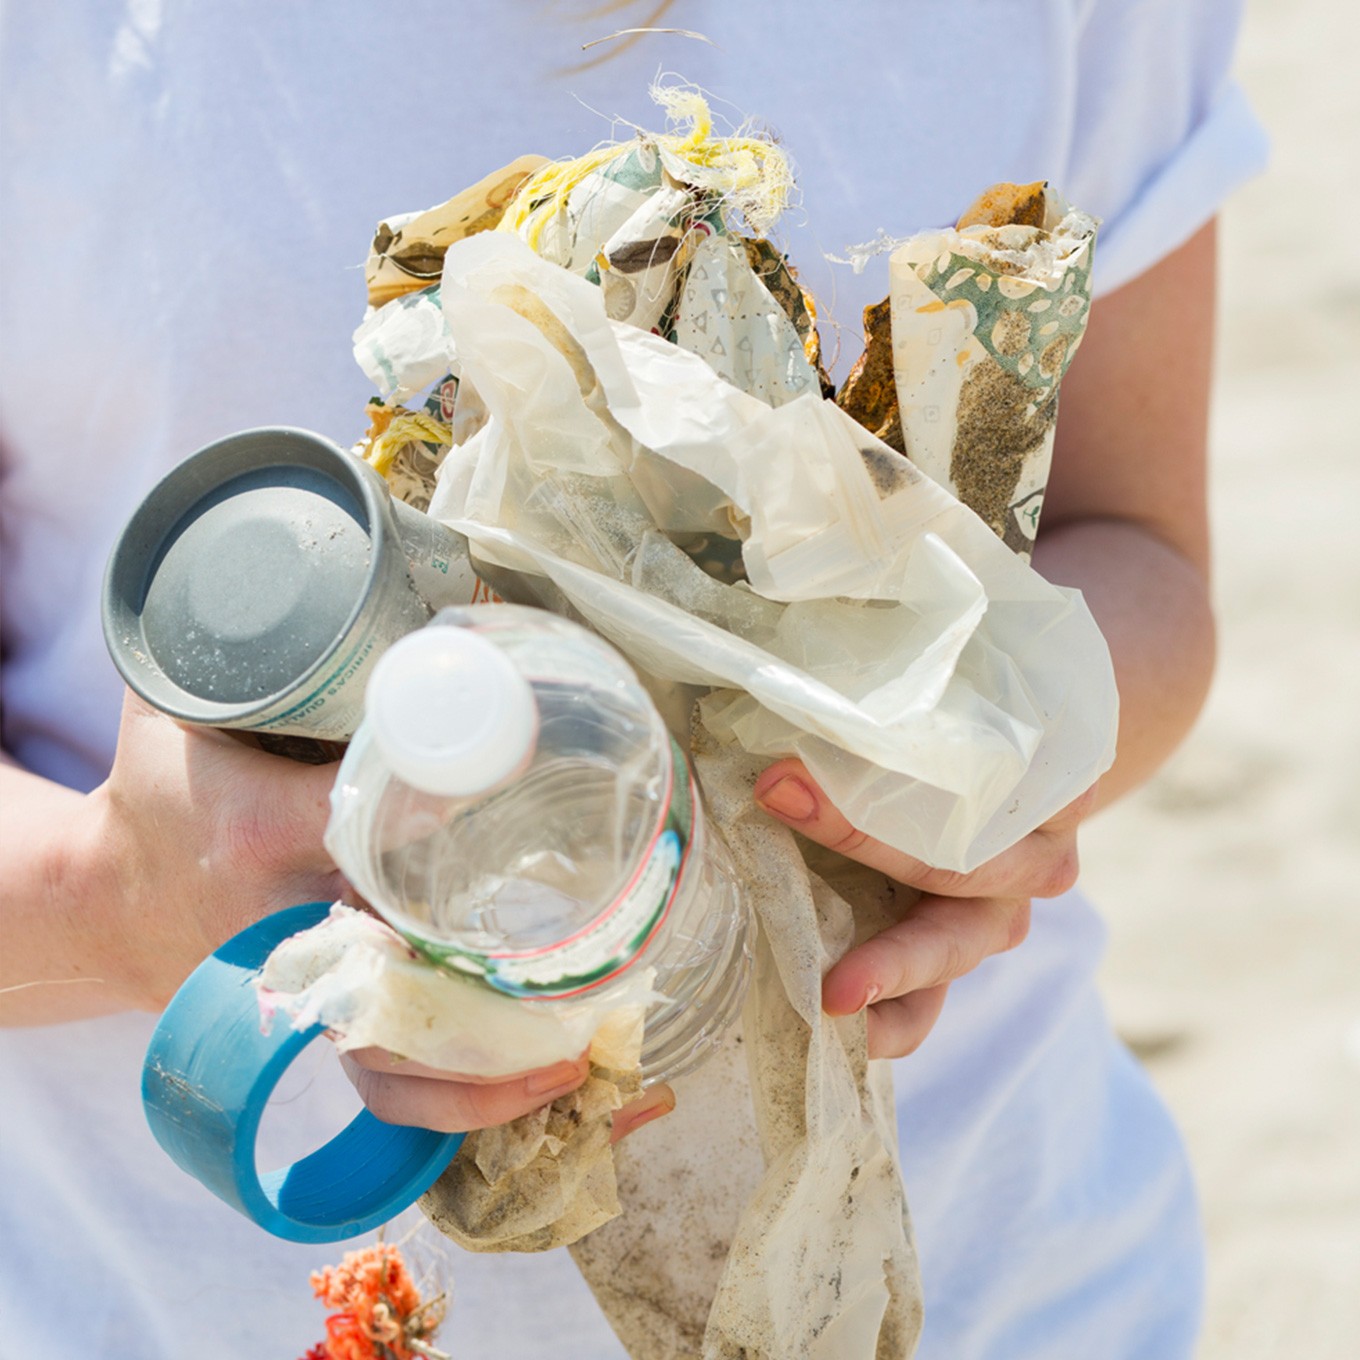 photo of person holding trash found on the beach